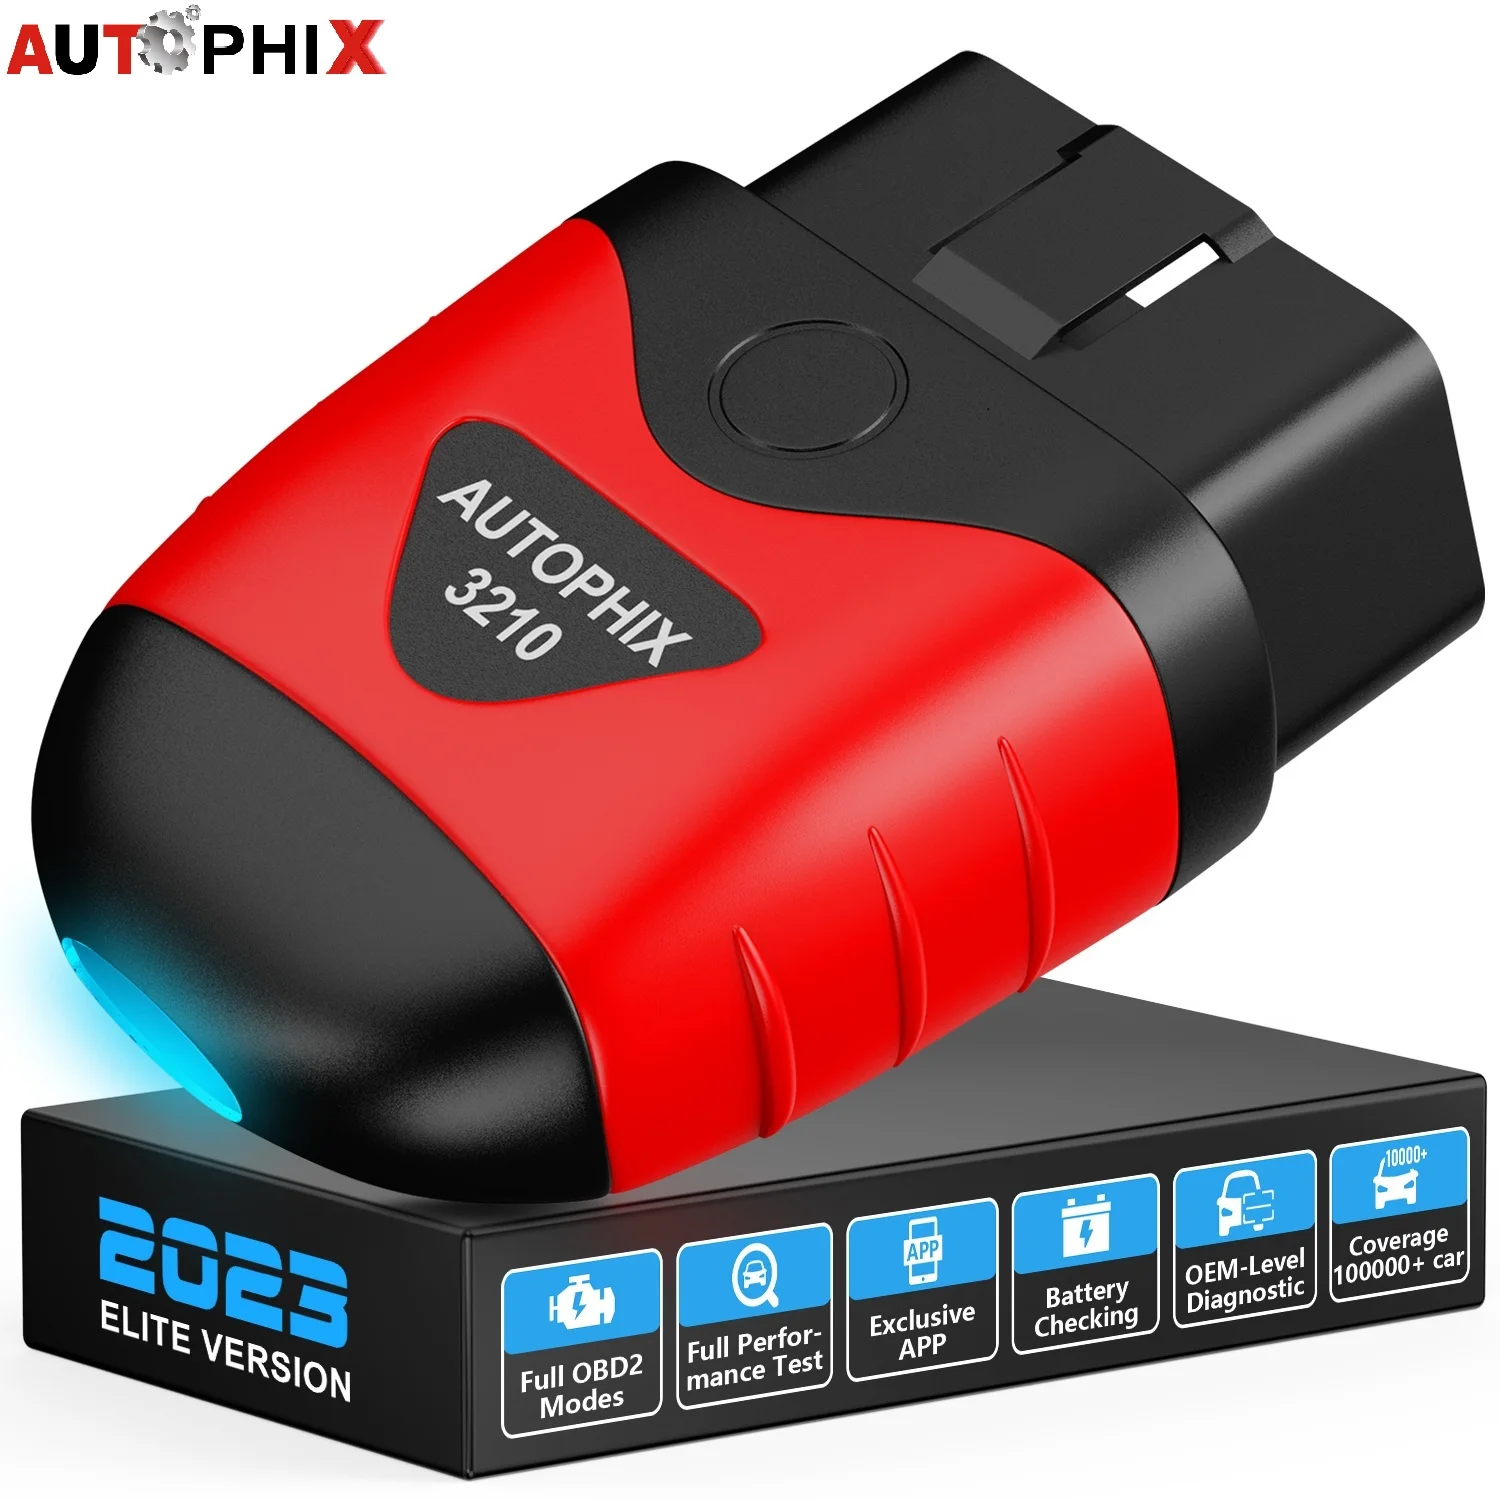 

AUTOPHIX 3210 Bluetooth OBD2 Scanner Car Code Readers Auto Professional Battery Test Check OBDII Diagnostic Scan Tools Test